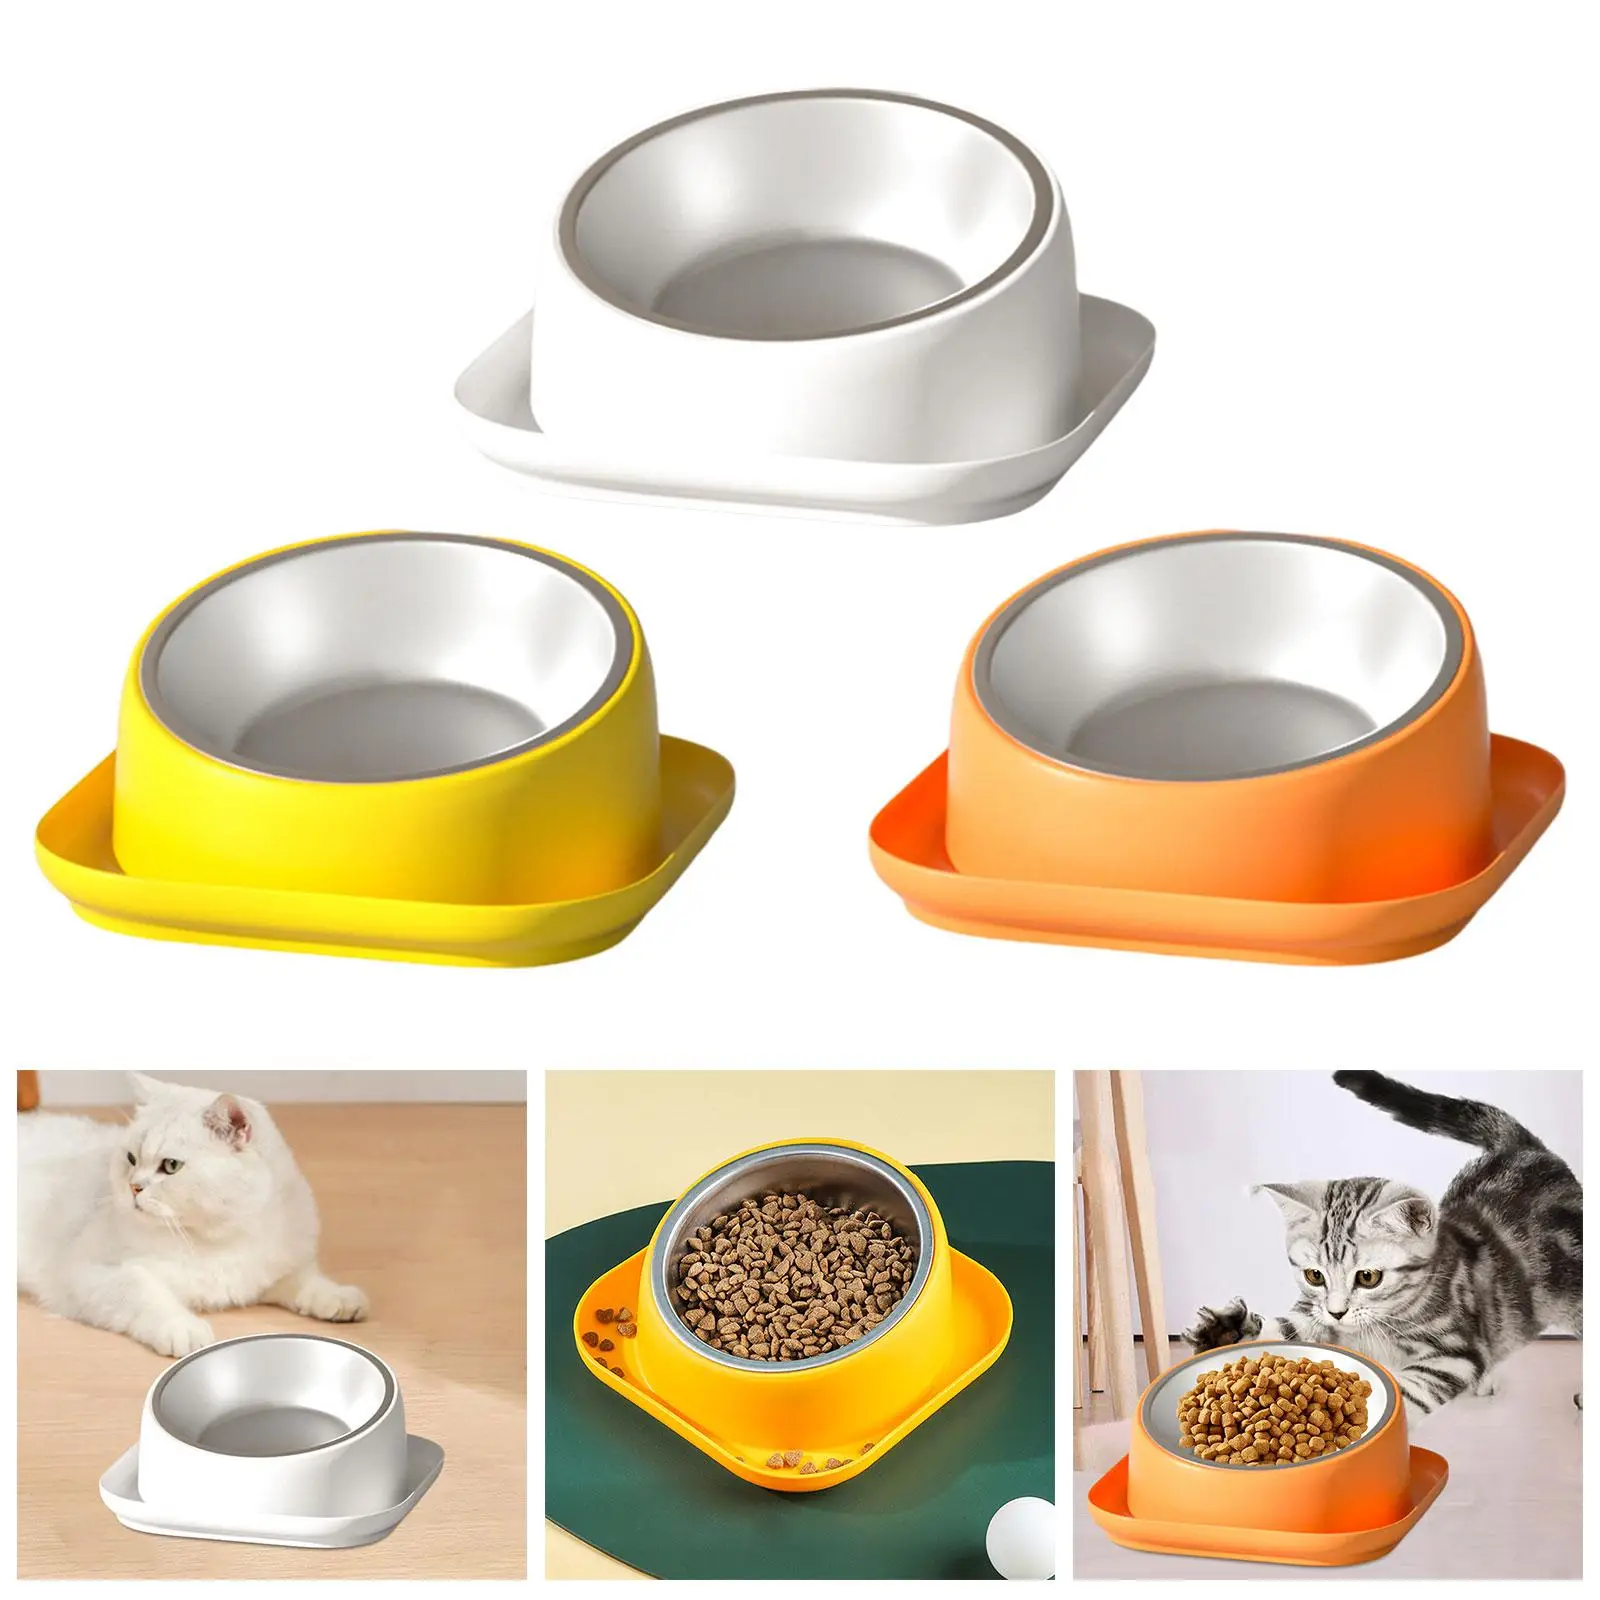 Stainless Steel Pet Bowl Food Container Cat Bowl Elevated Cat Food Bowl for Puppy Kitten Cats Small Dog Pets Supplies